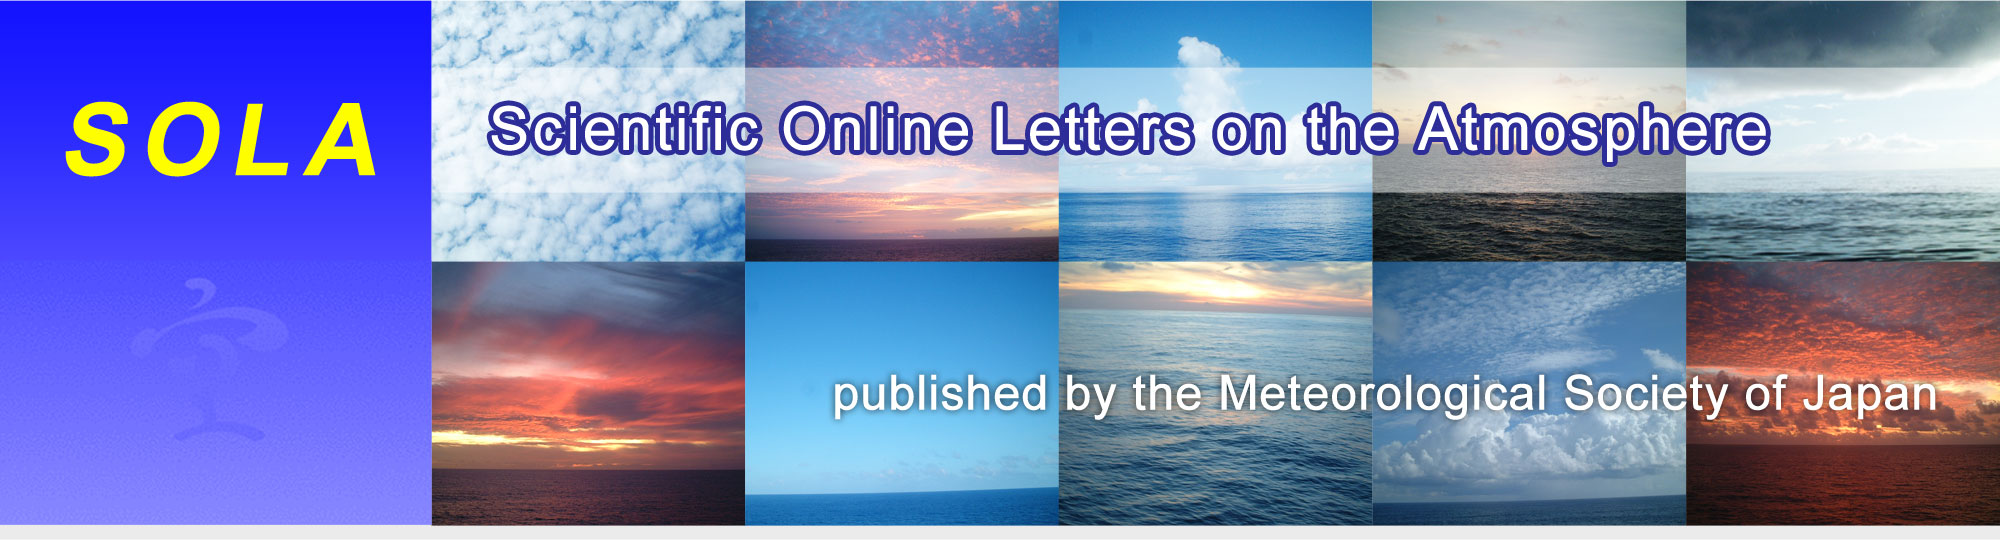 SOLA�@Scientific Online Letters on the Atmosphere